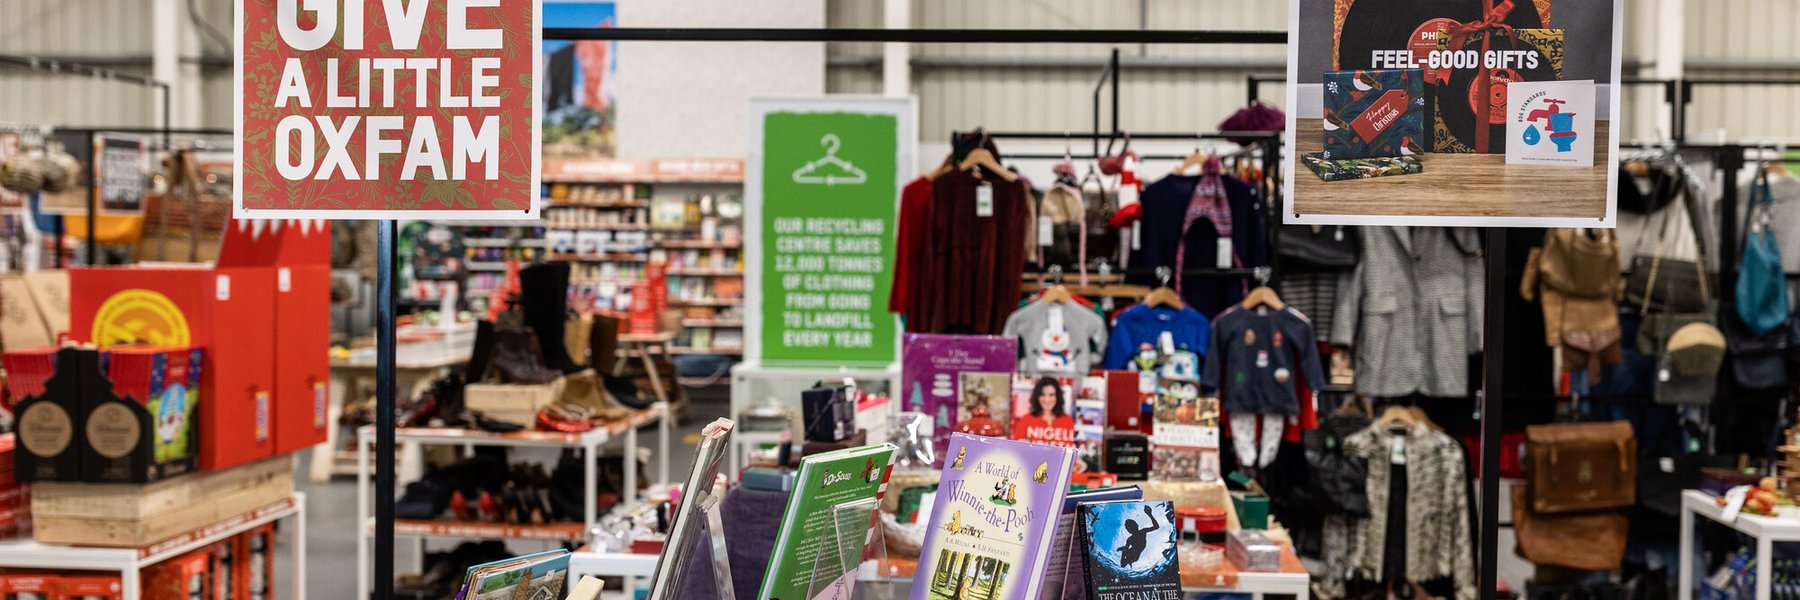 'Pre-loved Gifts' on display at Oxfam Superstore in Cowley, Oxford.